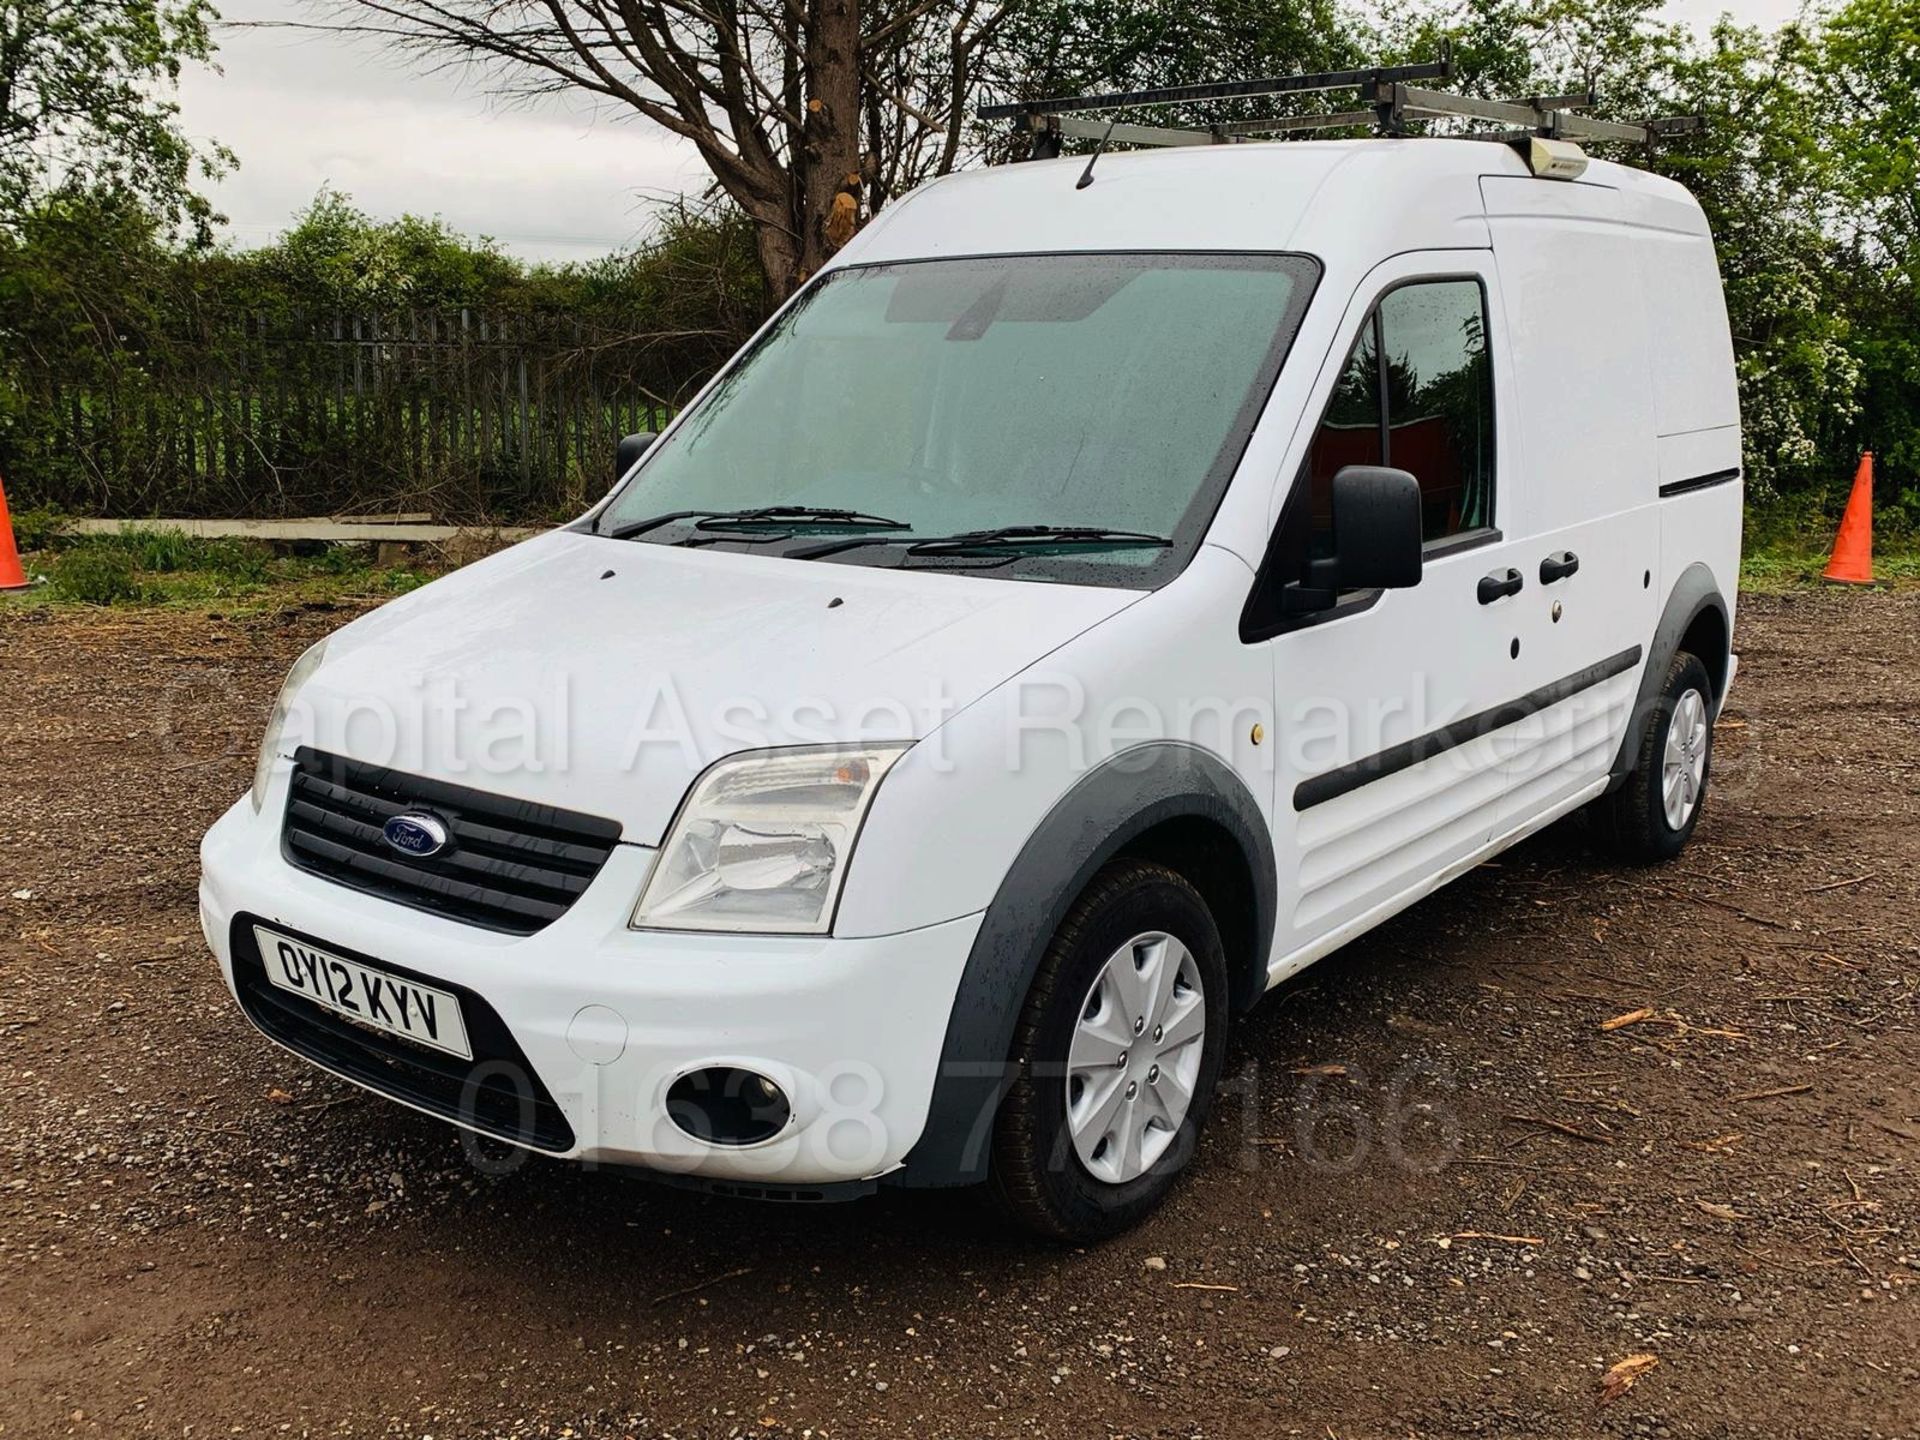 FORD TRANSIT CONNECT 90 T230 *TREND EDITION* 'LWB HI-ROOF' (2012) '1.8 TDCI - 90 BHP - 5 SPEED' - Image 2 of 22